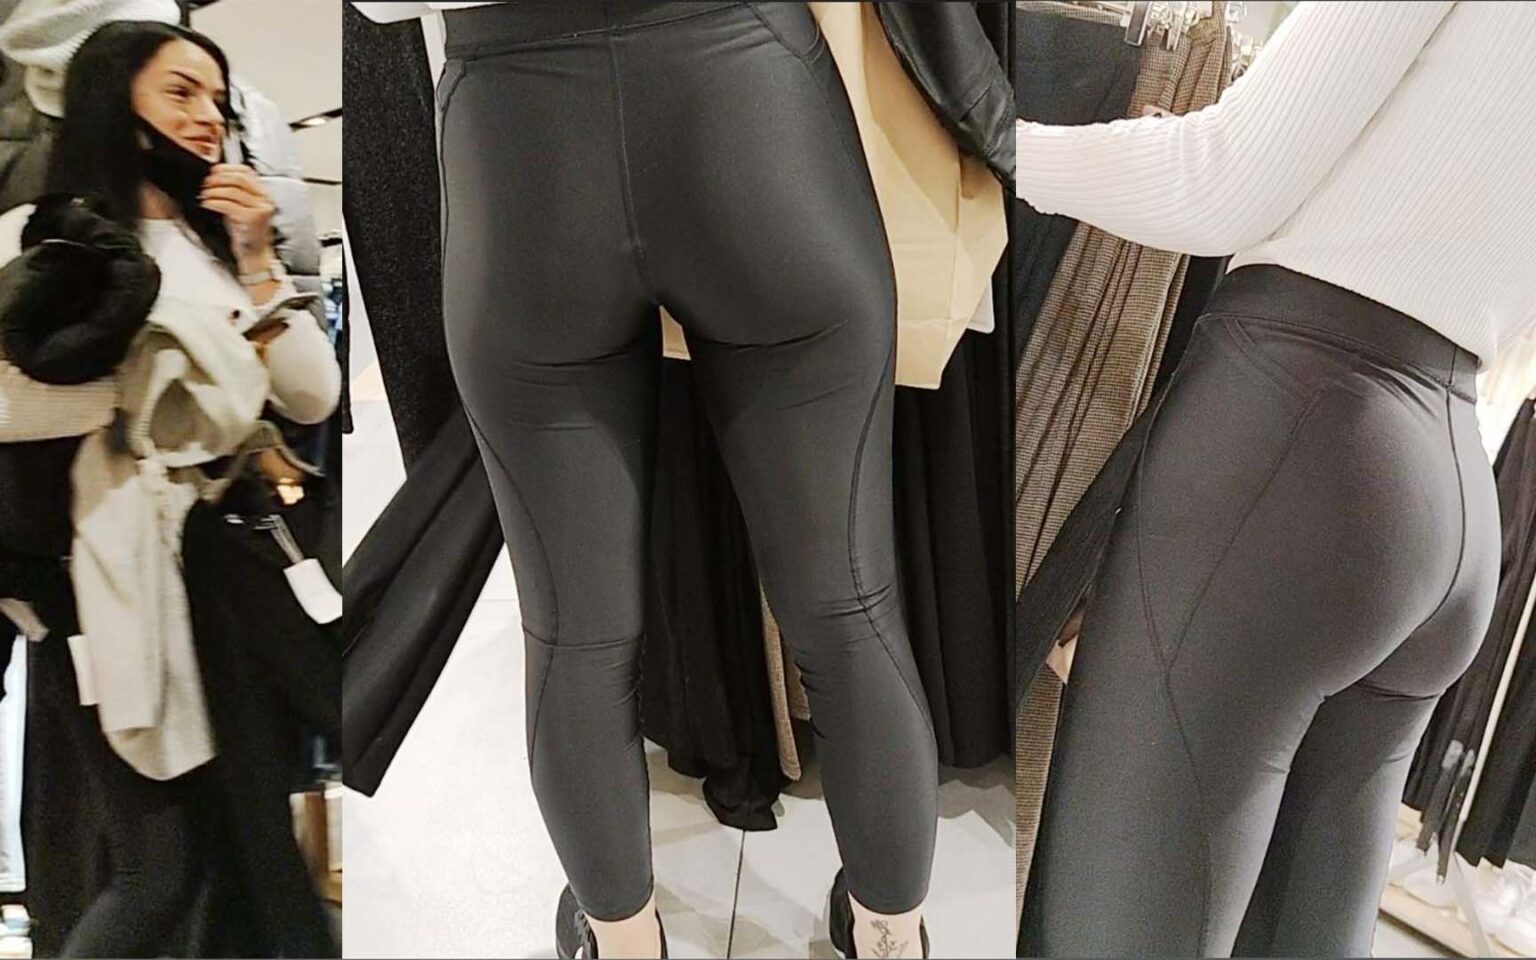 VTL brunette in leggings with friend out shopping - Candid Best Premium